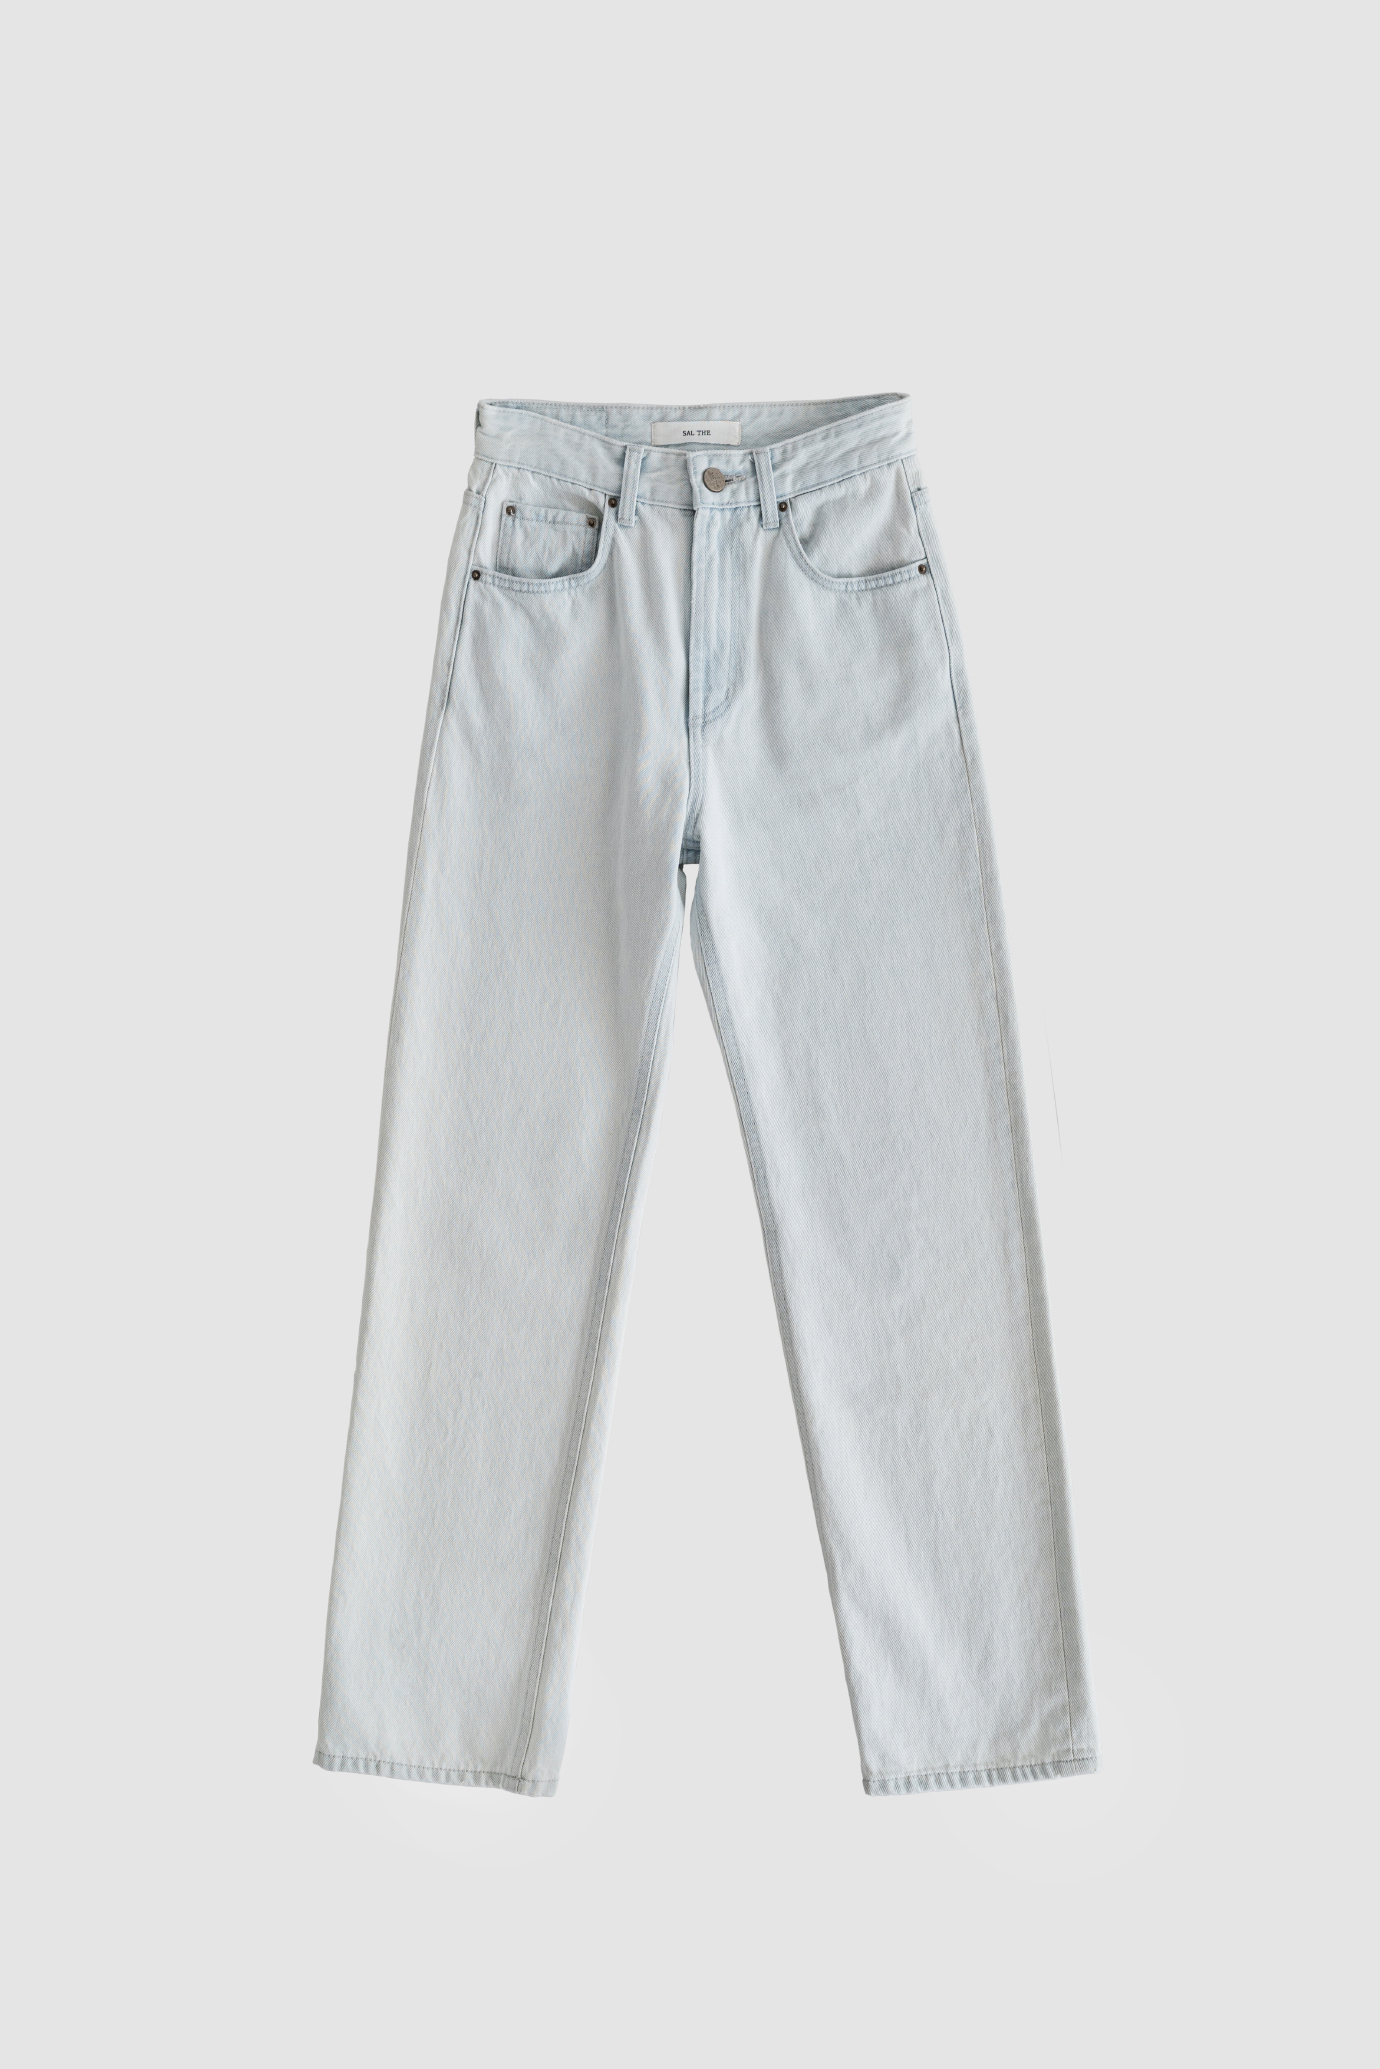 11848_Cone Ice blue Jeans